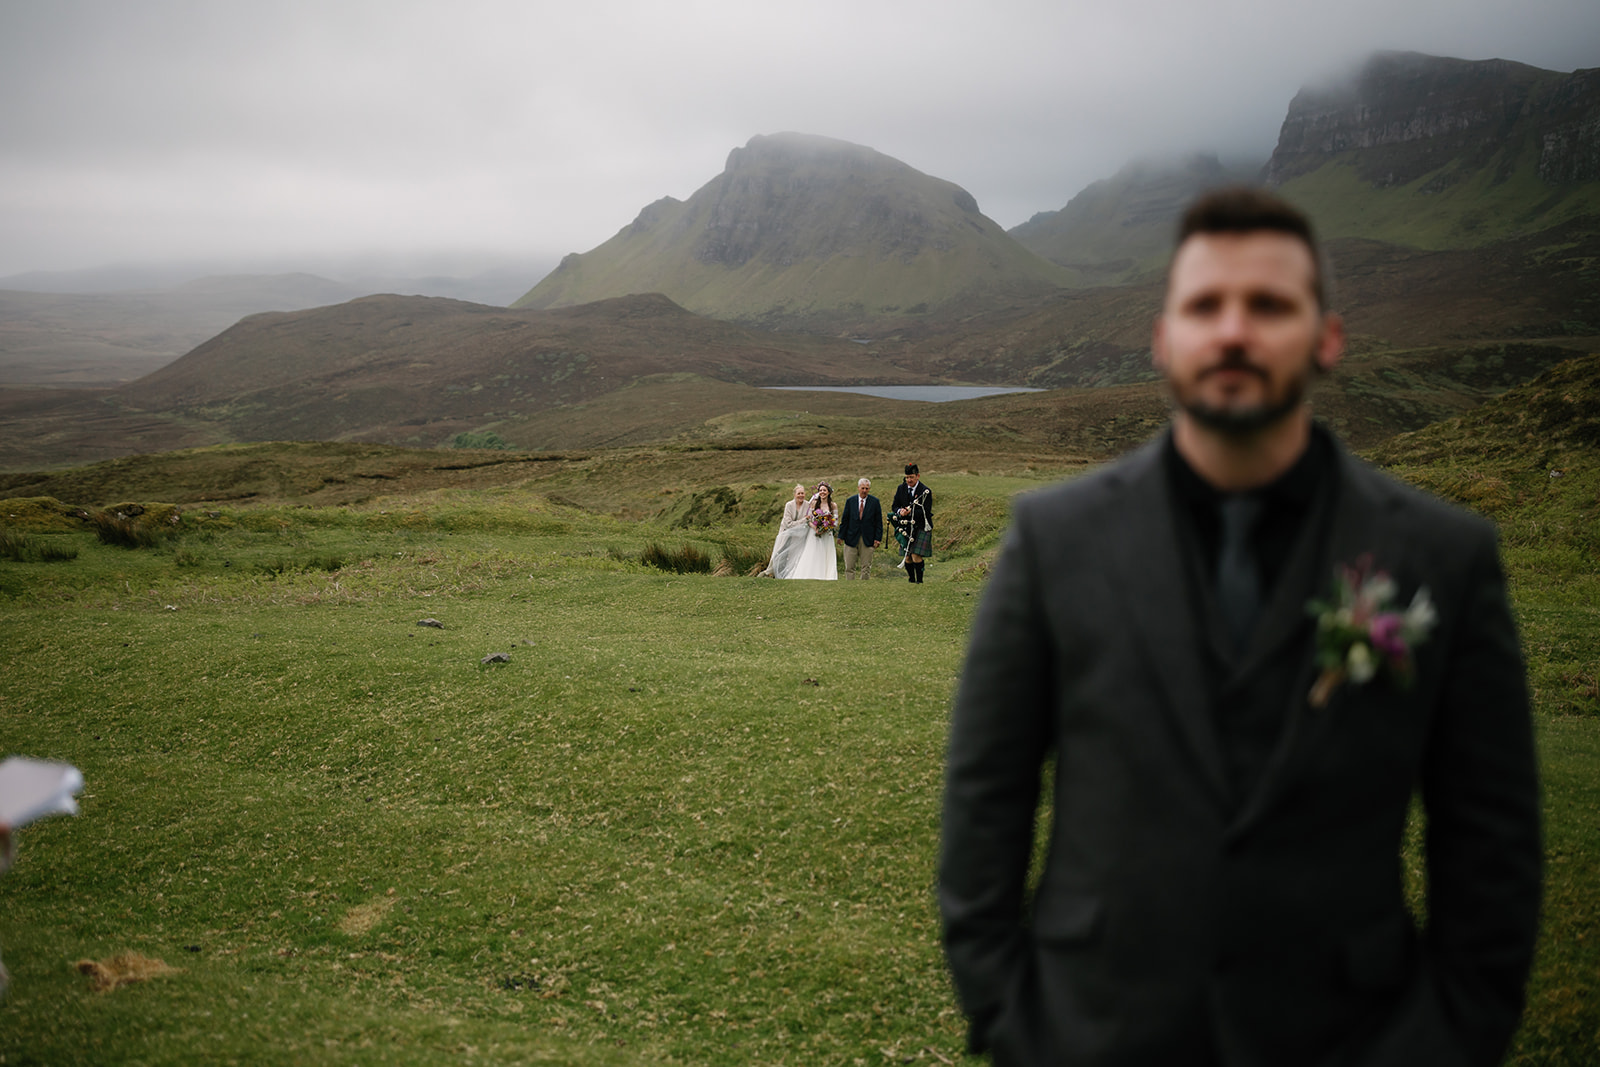 Becca and Nick's first look, a moment of pure connection and love, captured against the majestic Isle of Skye